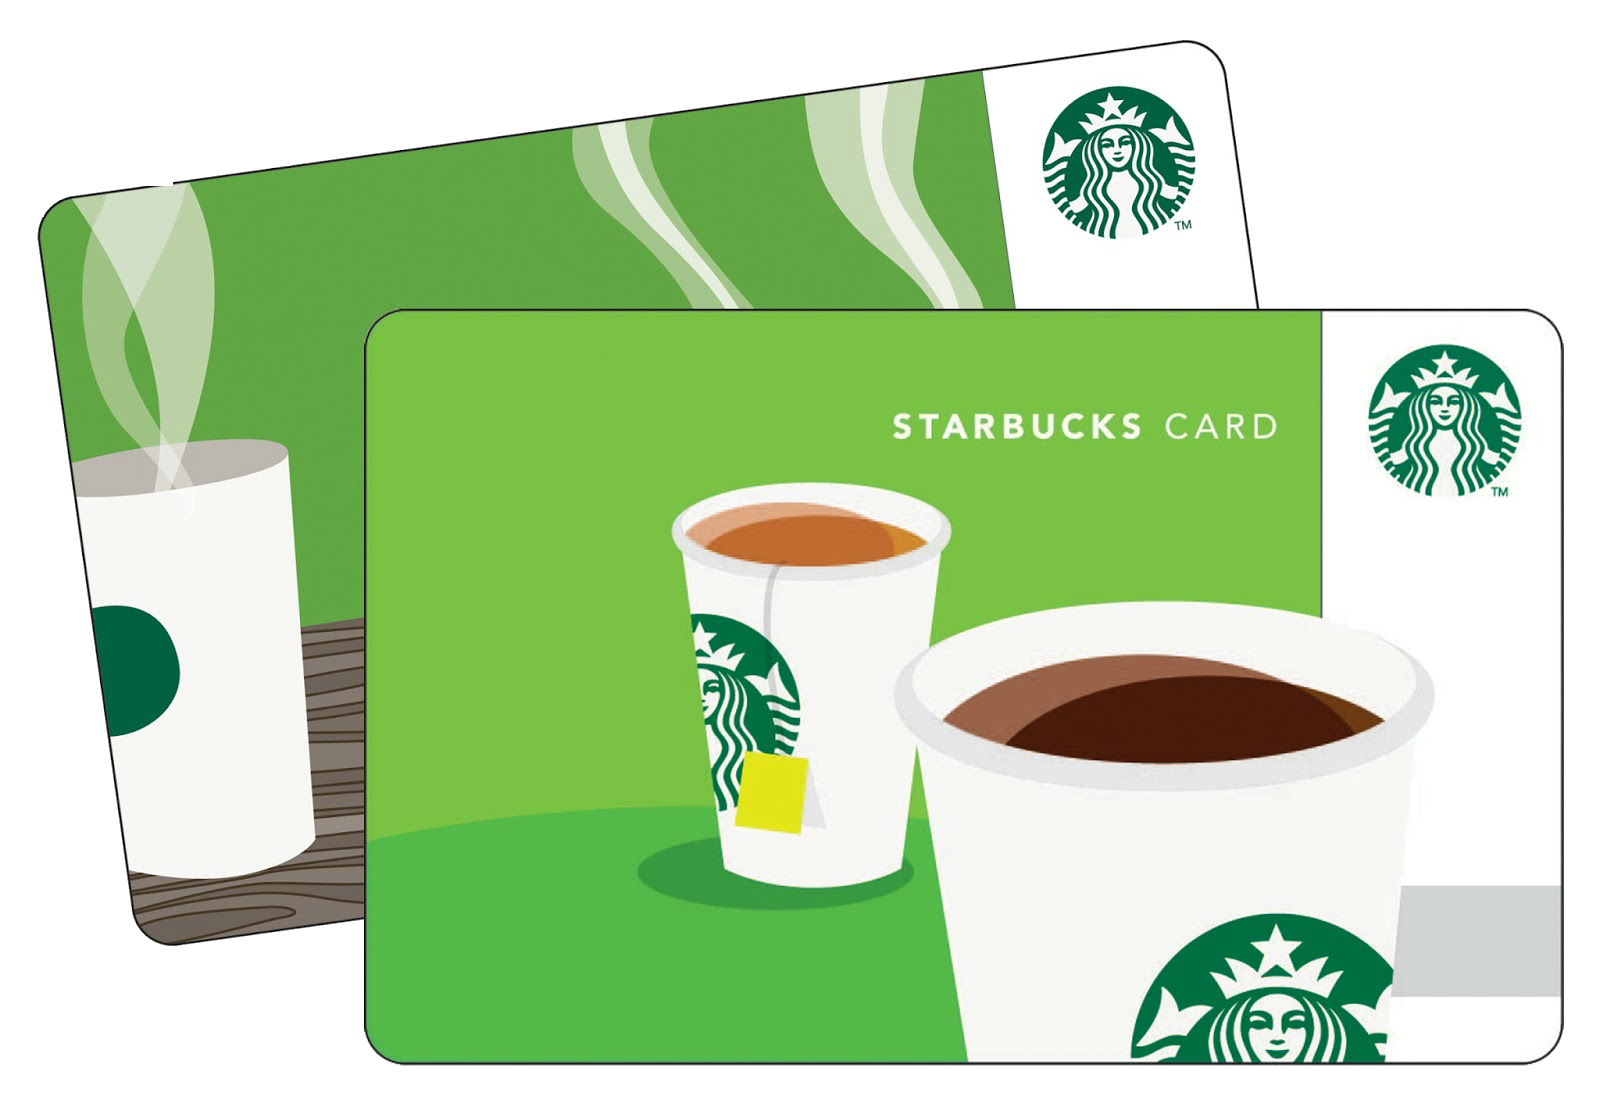 How To Check Starbucks Gift Card Balance At www.starbucks.com Complete Step By Step Guide